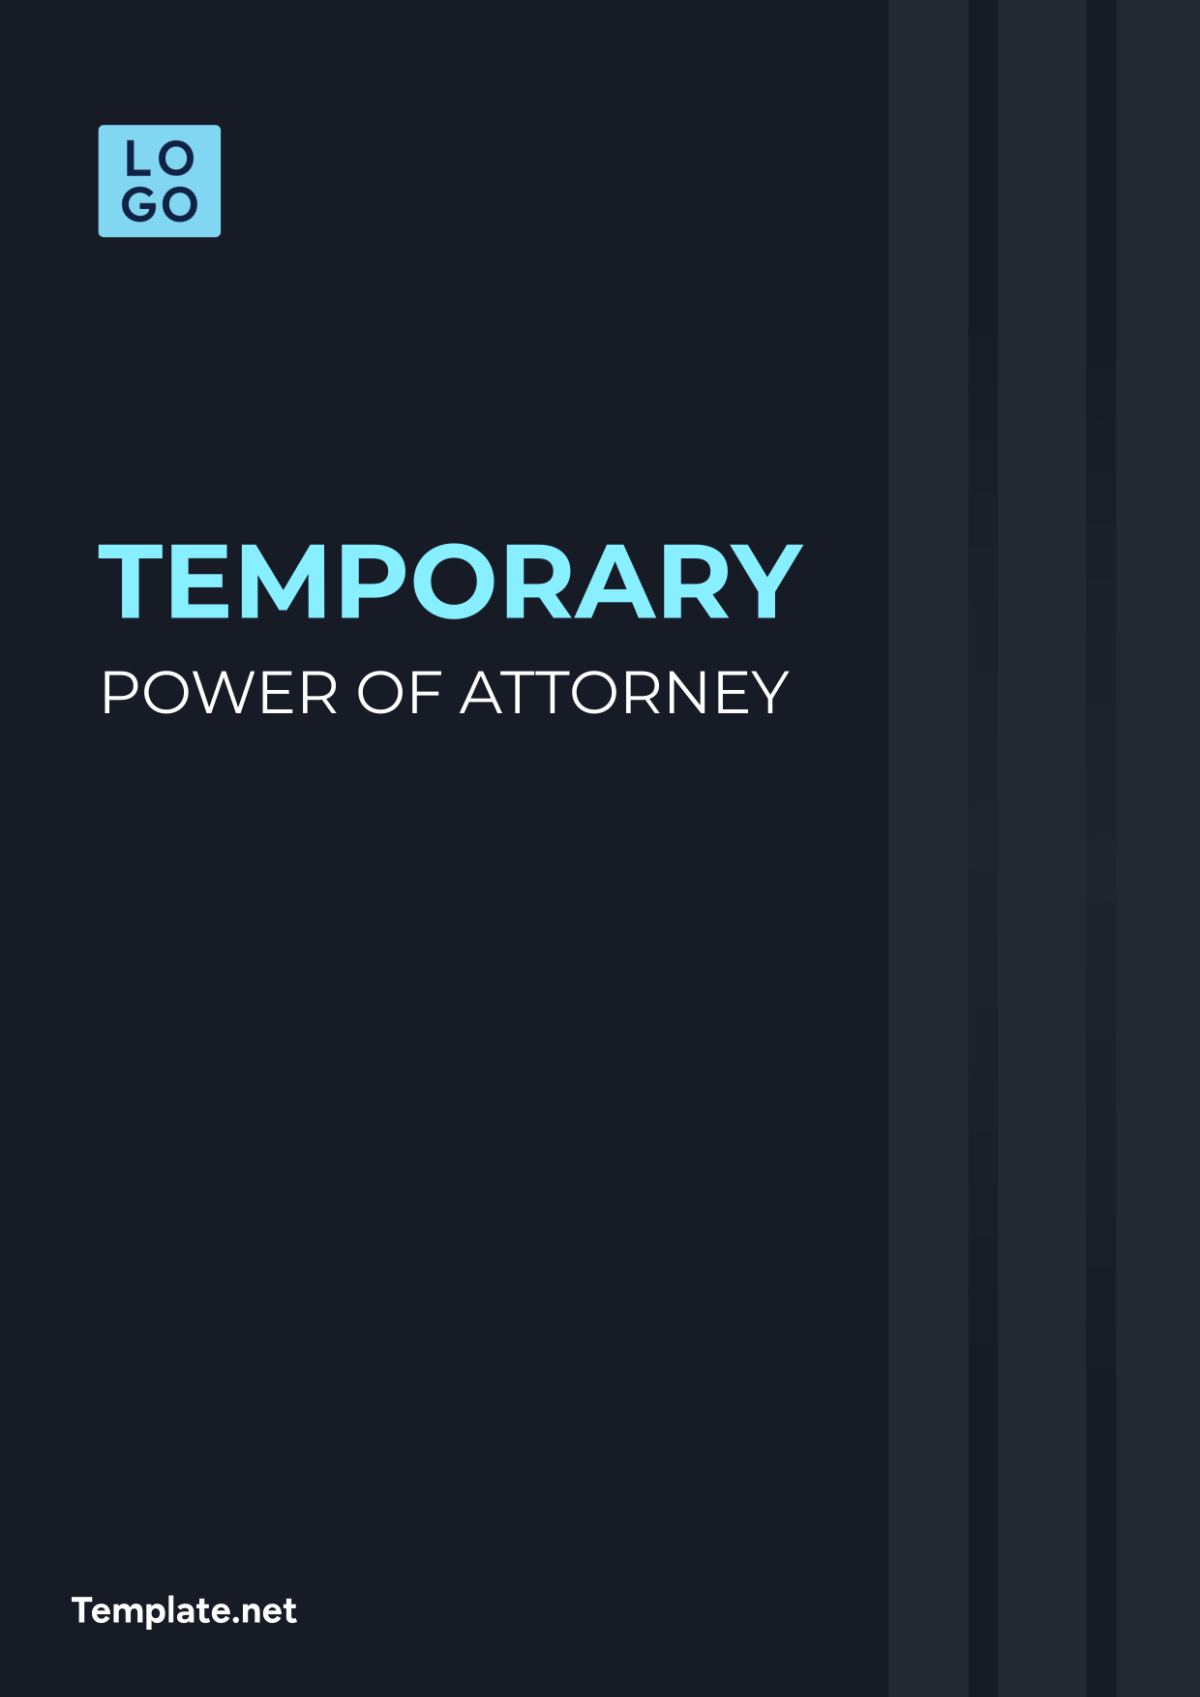 Temporary Power of Attorney Cover Page Template